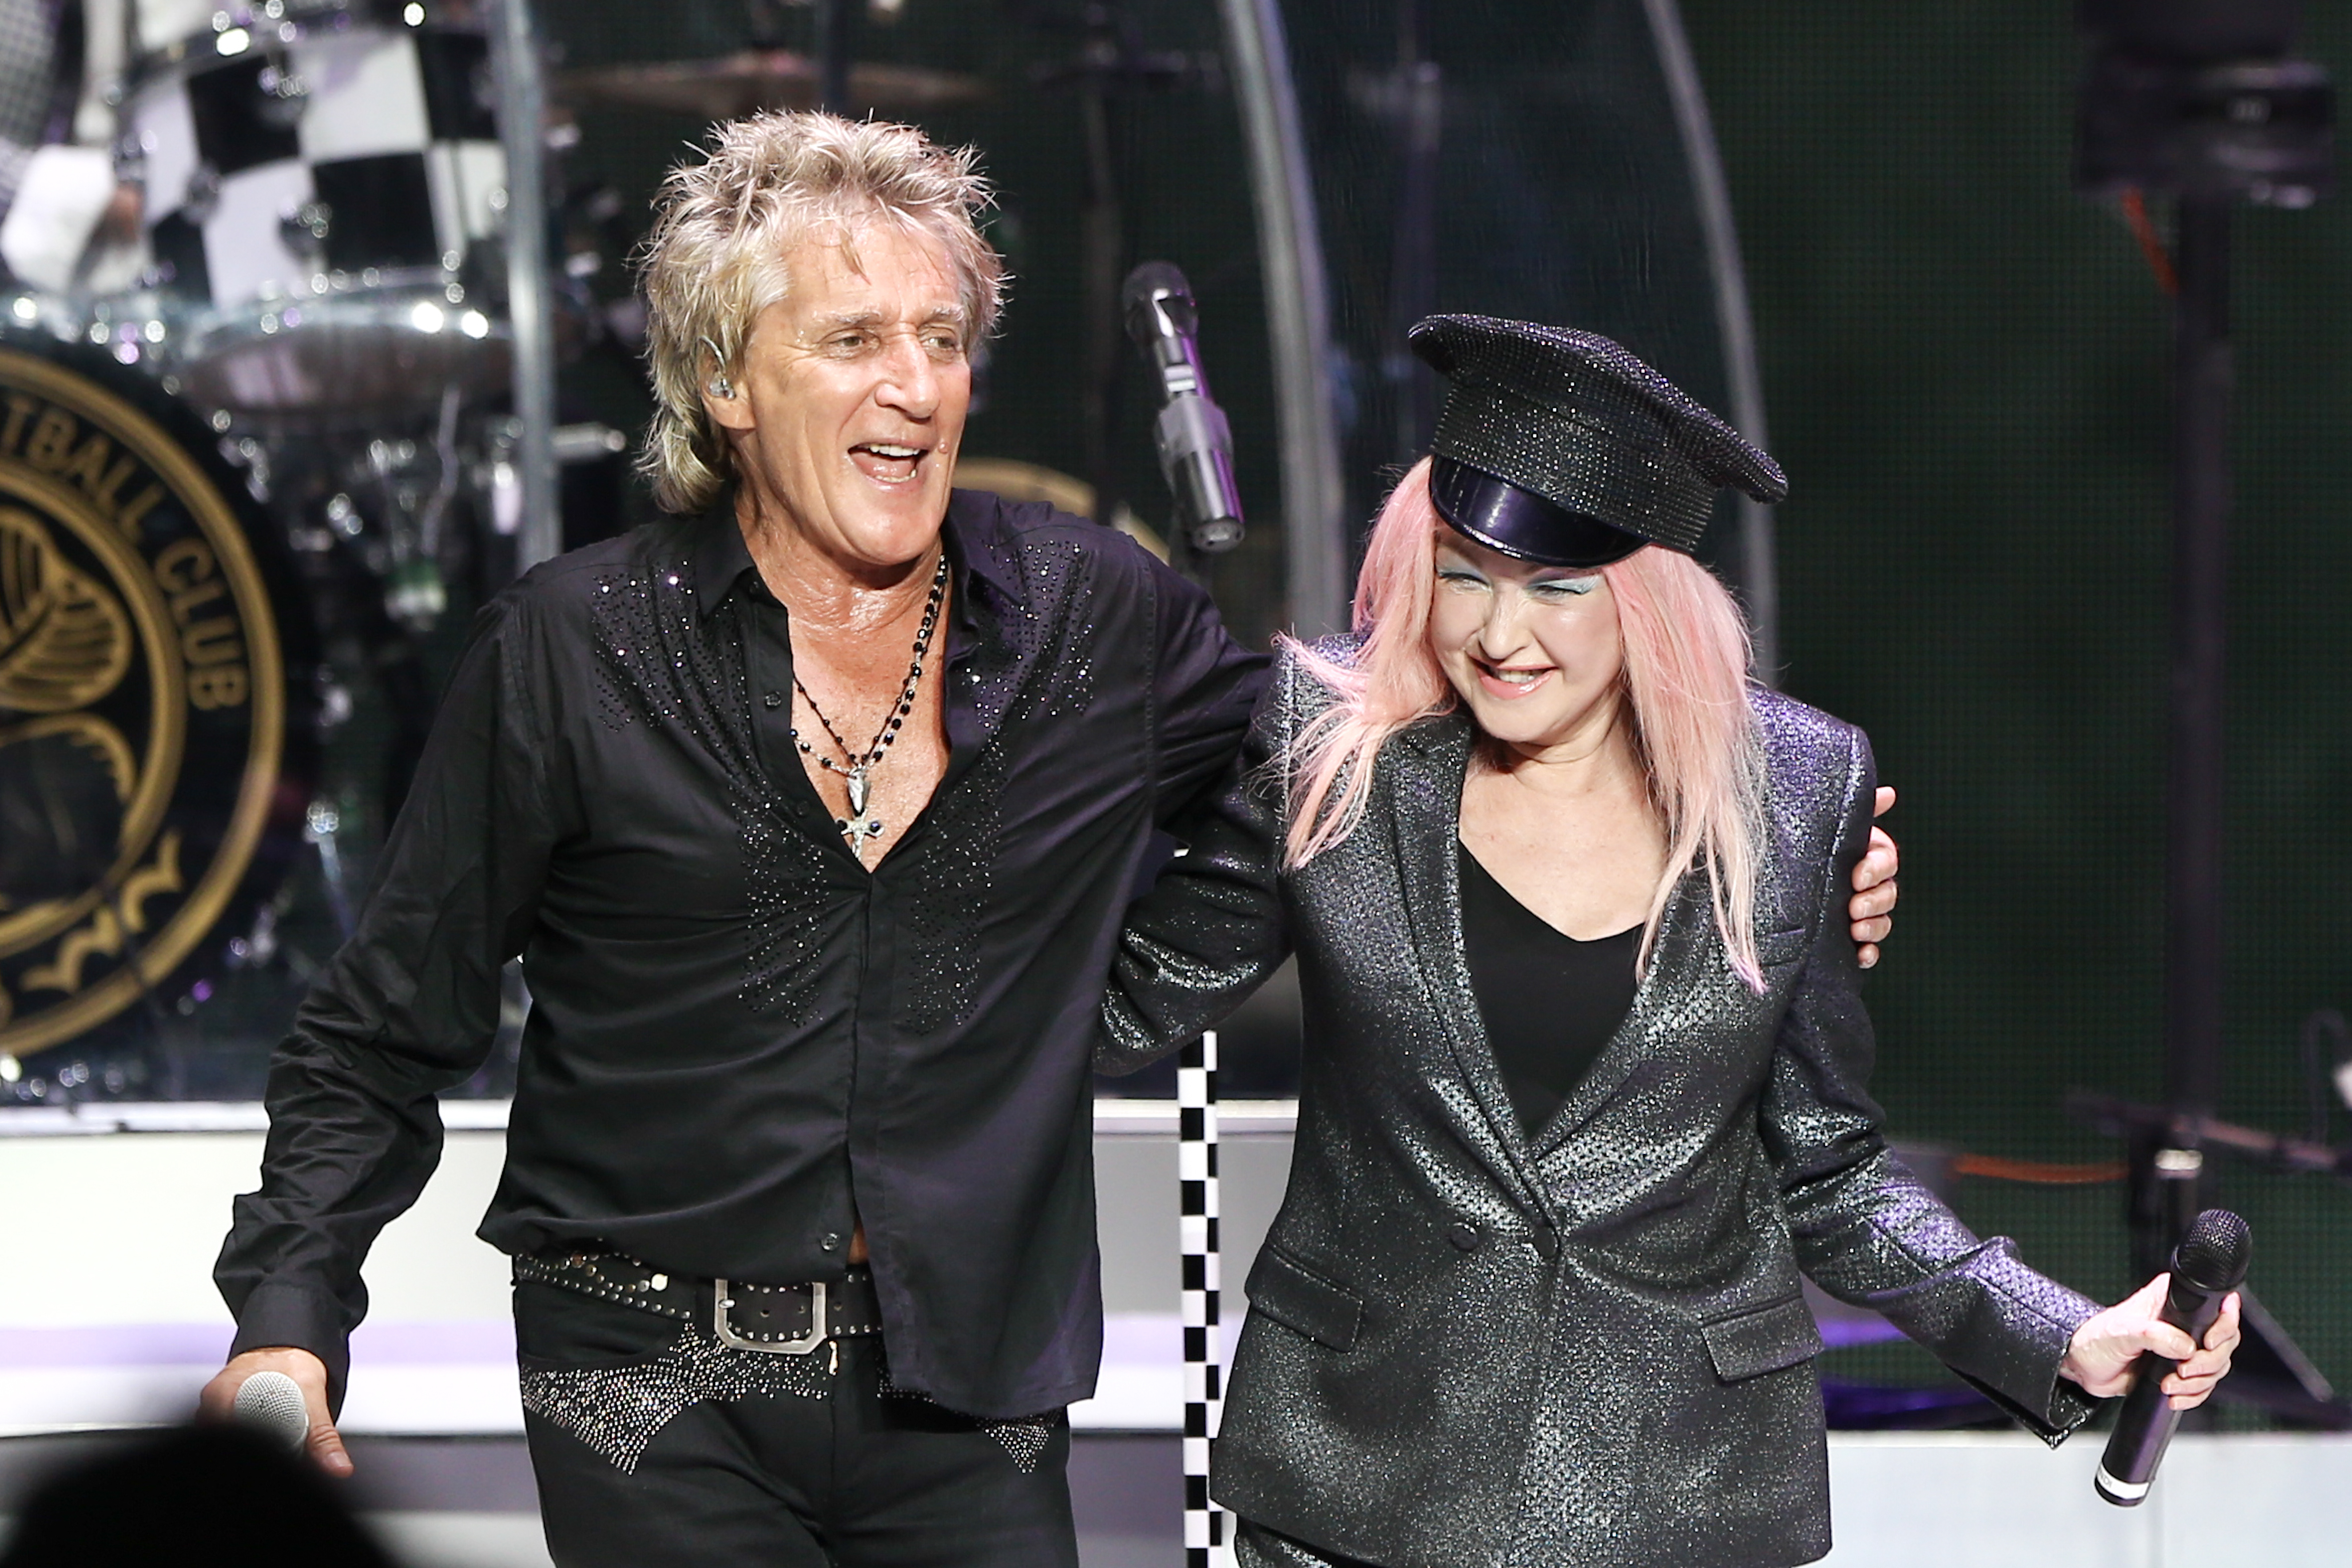 Rod Stewart and Cyndi Lauper performed at Bethel Woods